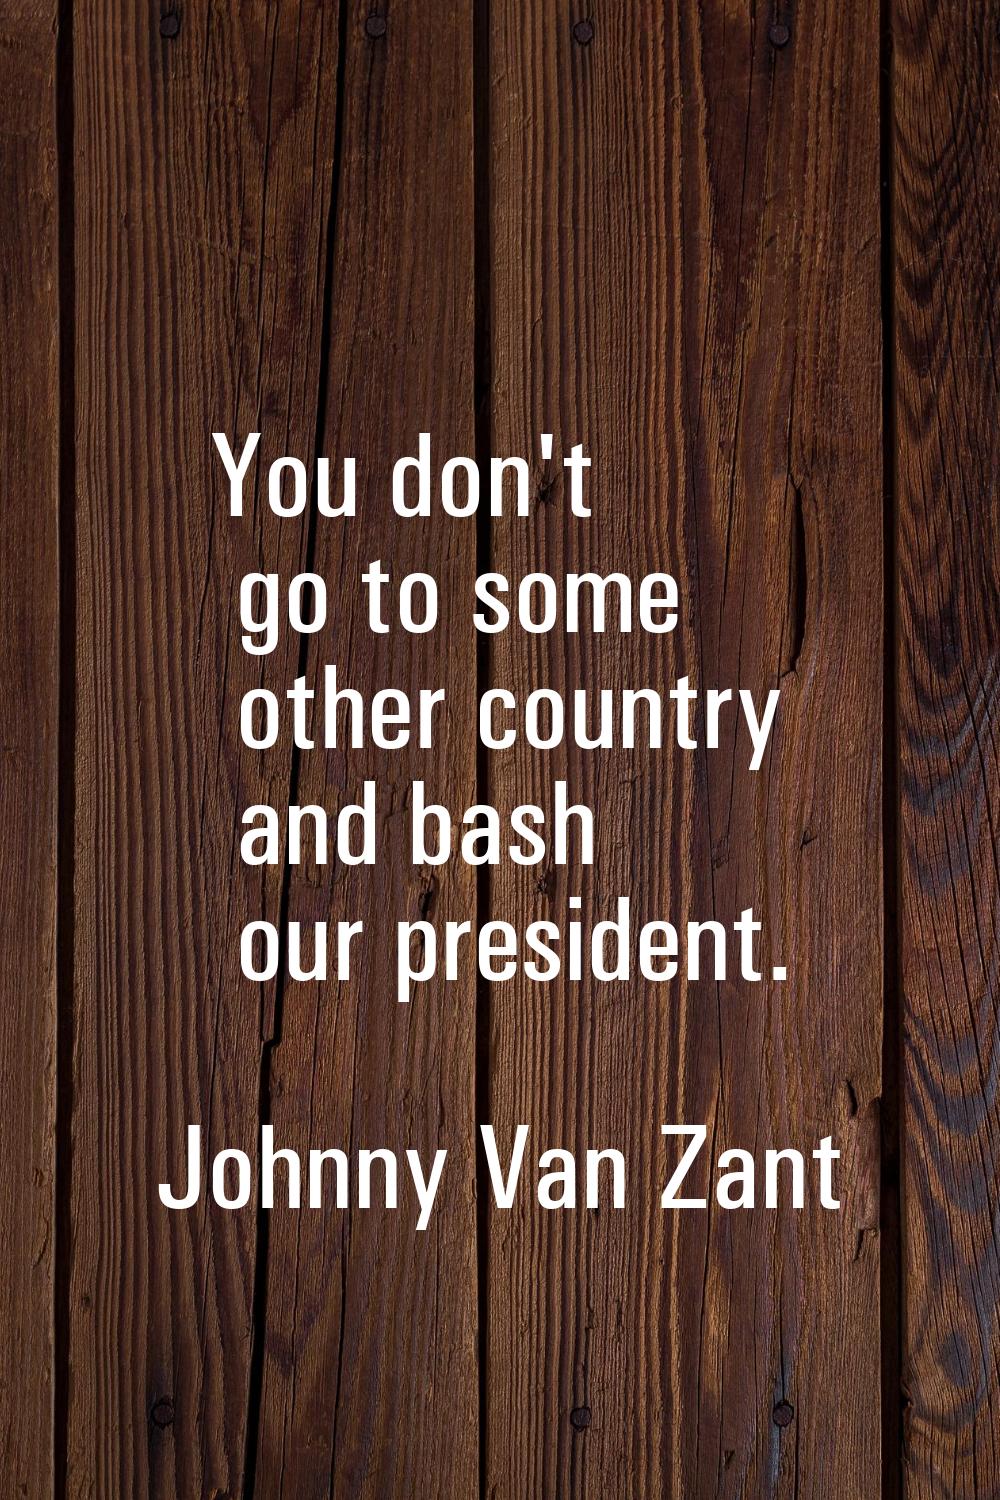 You don't go to some other country and bash our president.